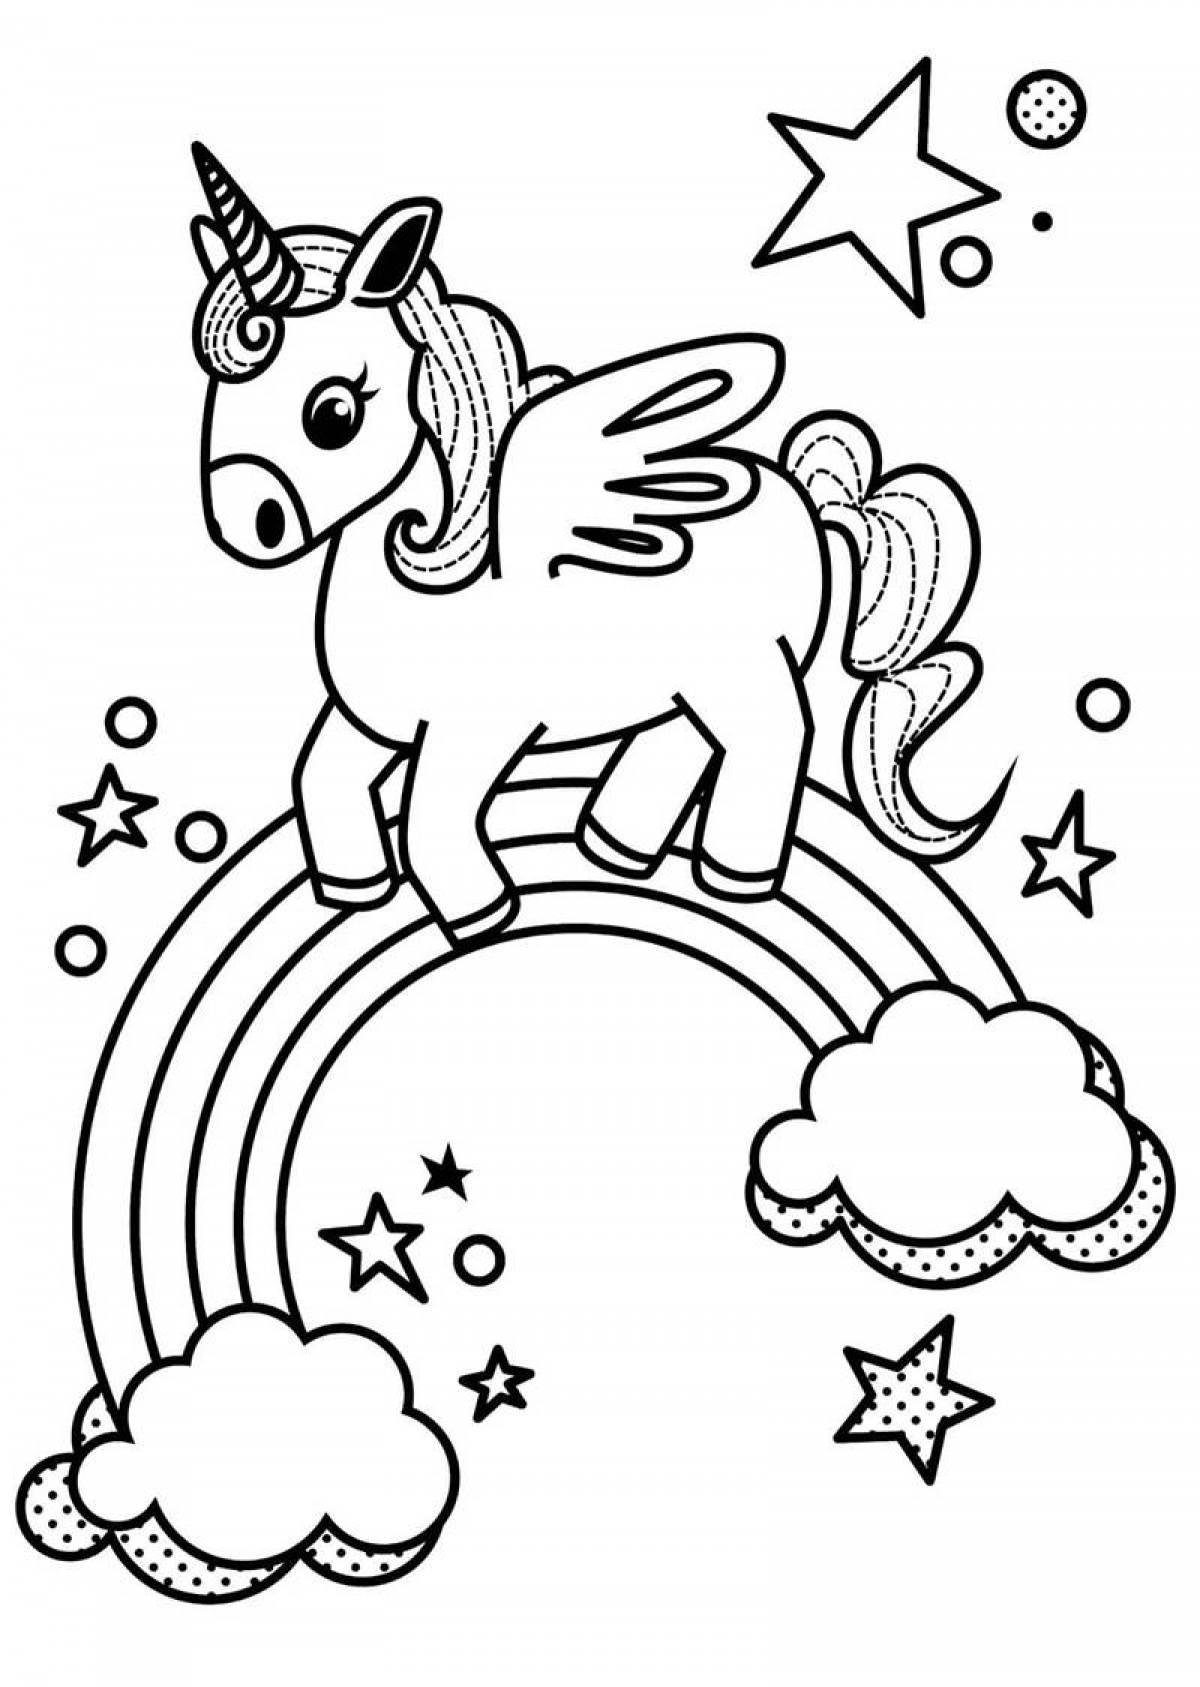 Amazing unicorn coloring pages for girls